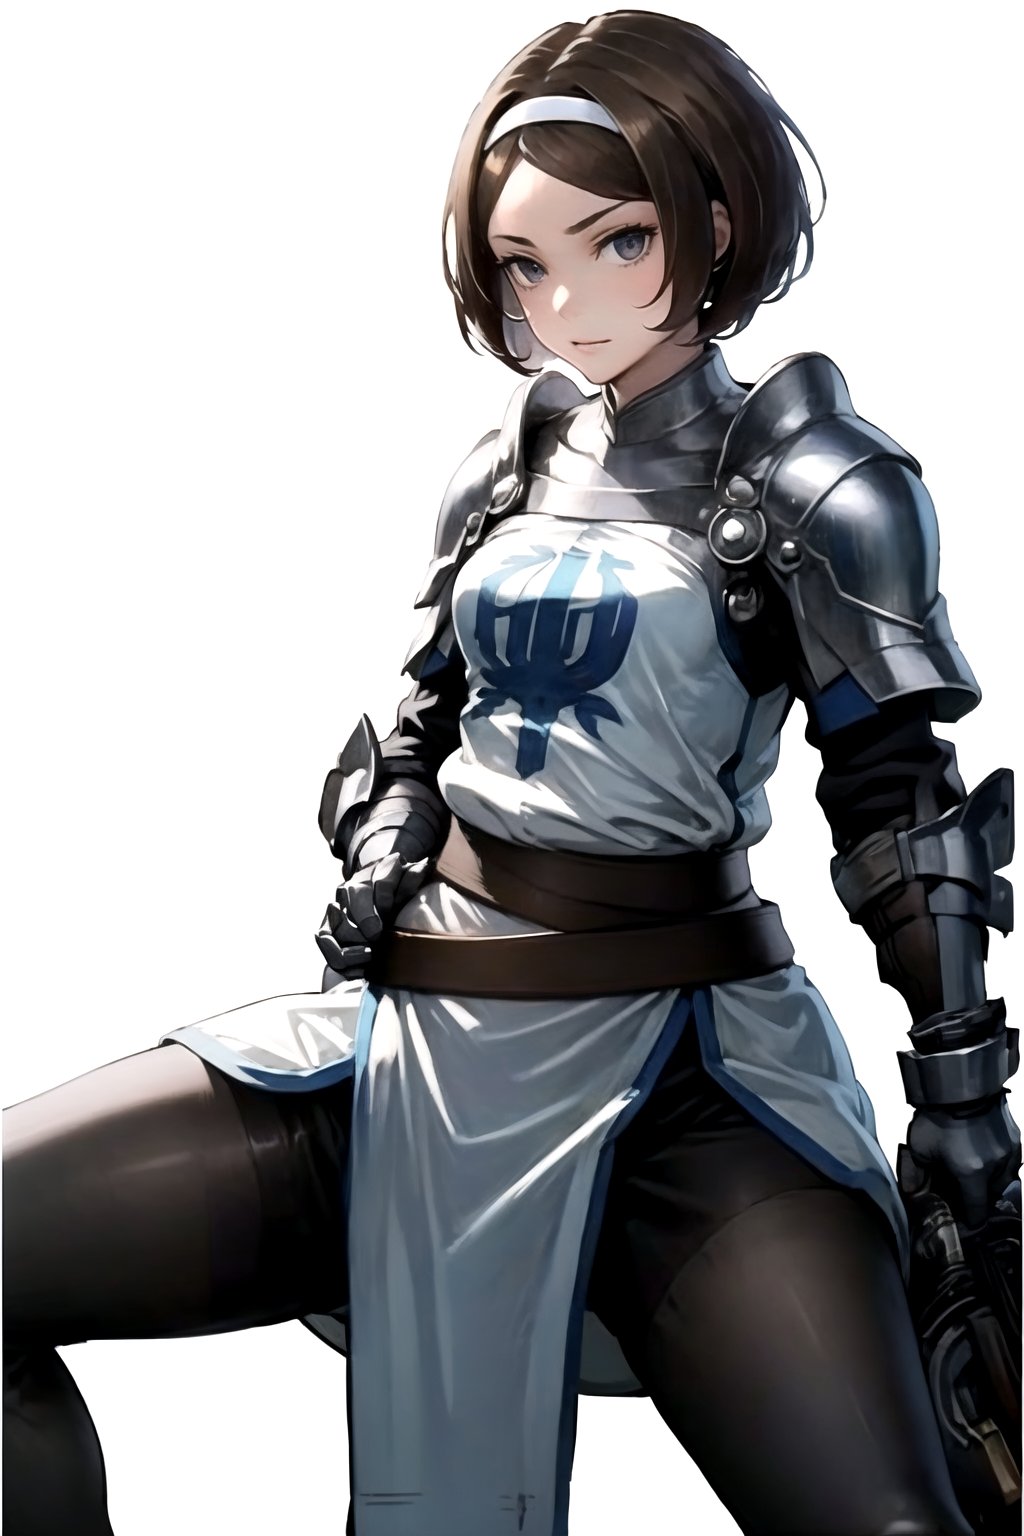 //Quality,
masterpiece, best quality
,//Character,
1girl, solo
,//Fashion, 
,//Background,
white_background
,//Others,
,spread legs, 
Remedios, short hair, hair band, brown hair, armor